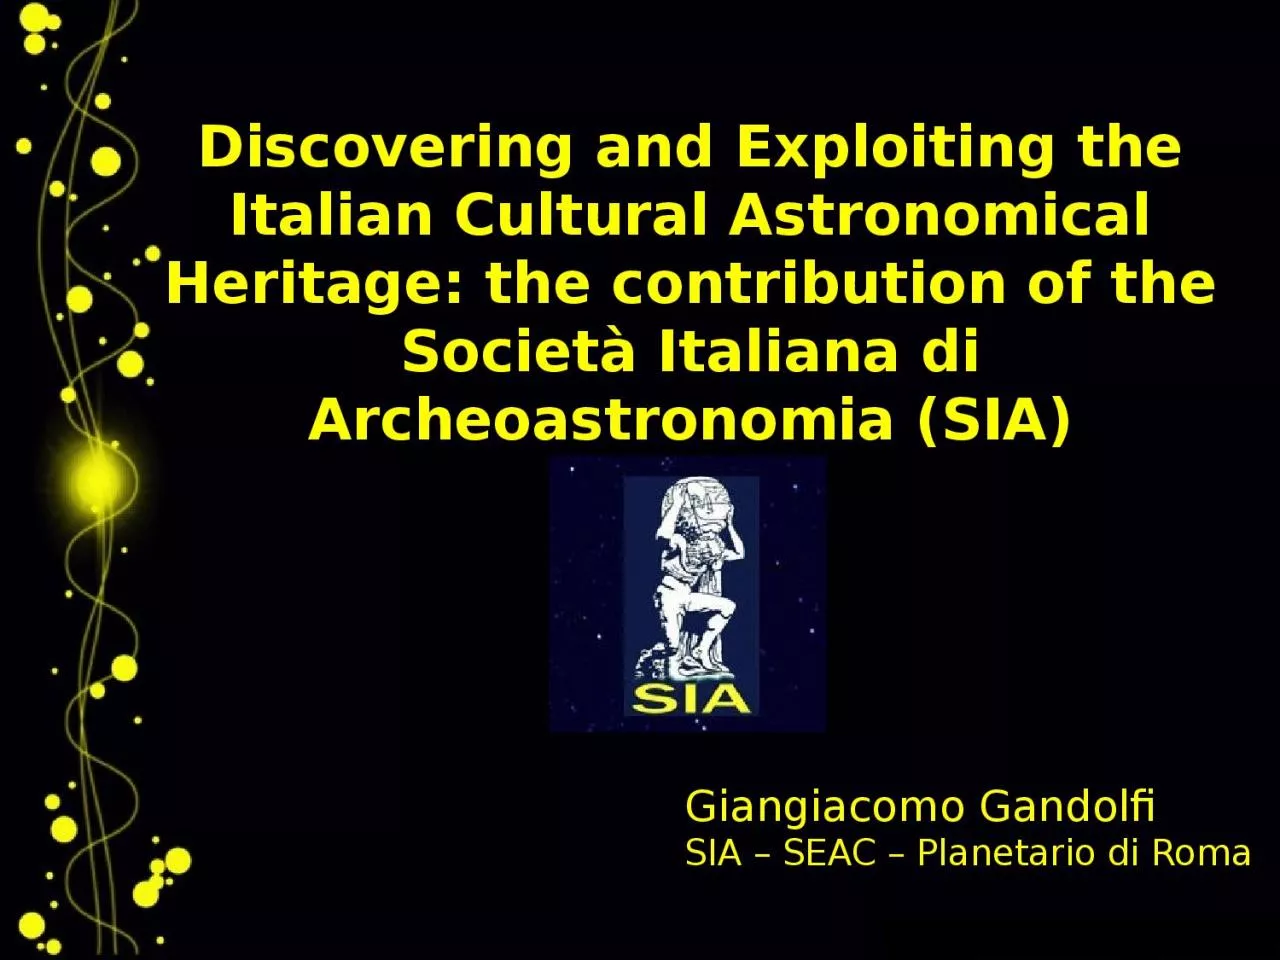 Discovering and Exploiting the Italian Cultural Astronomical Heritage: the contribution